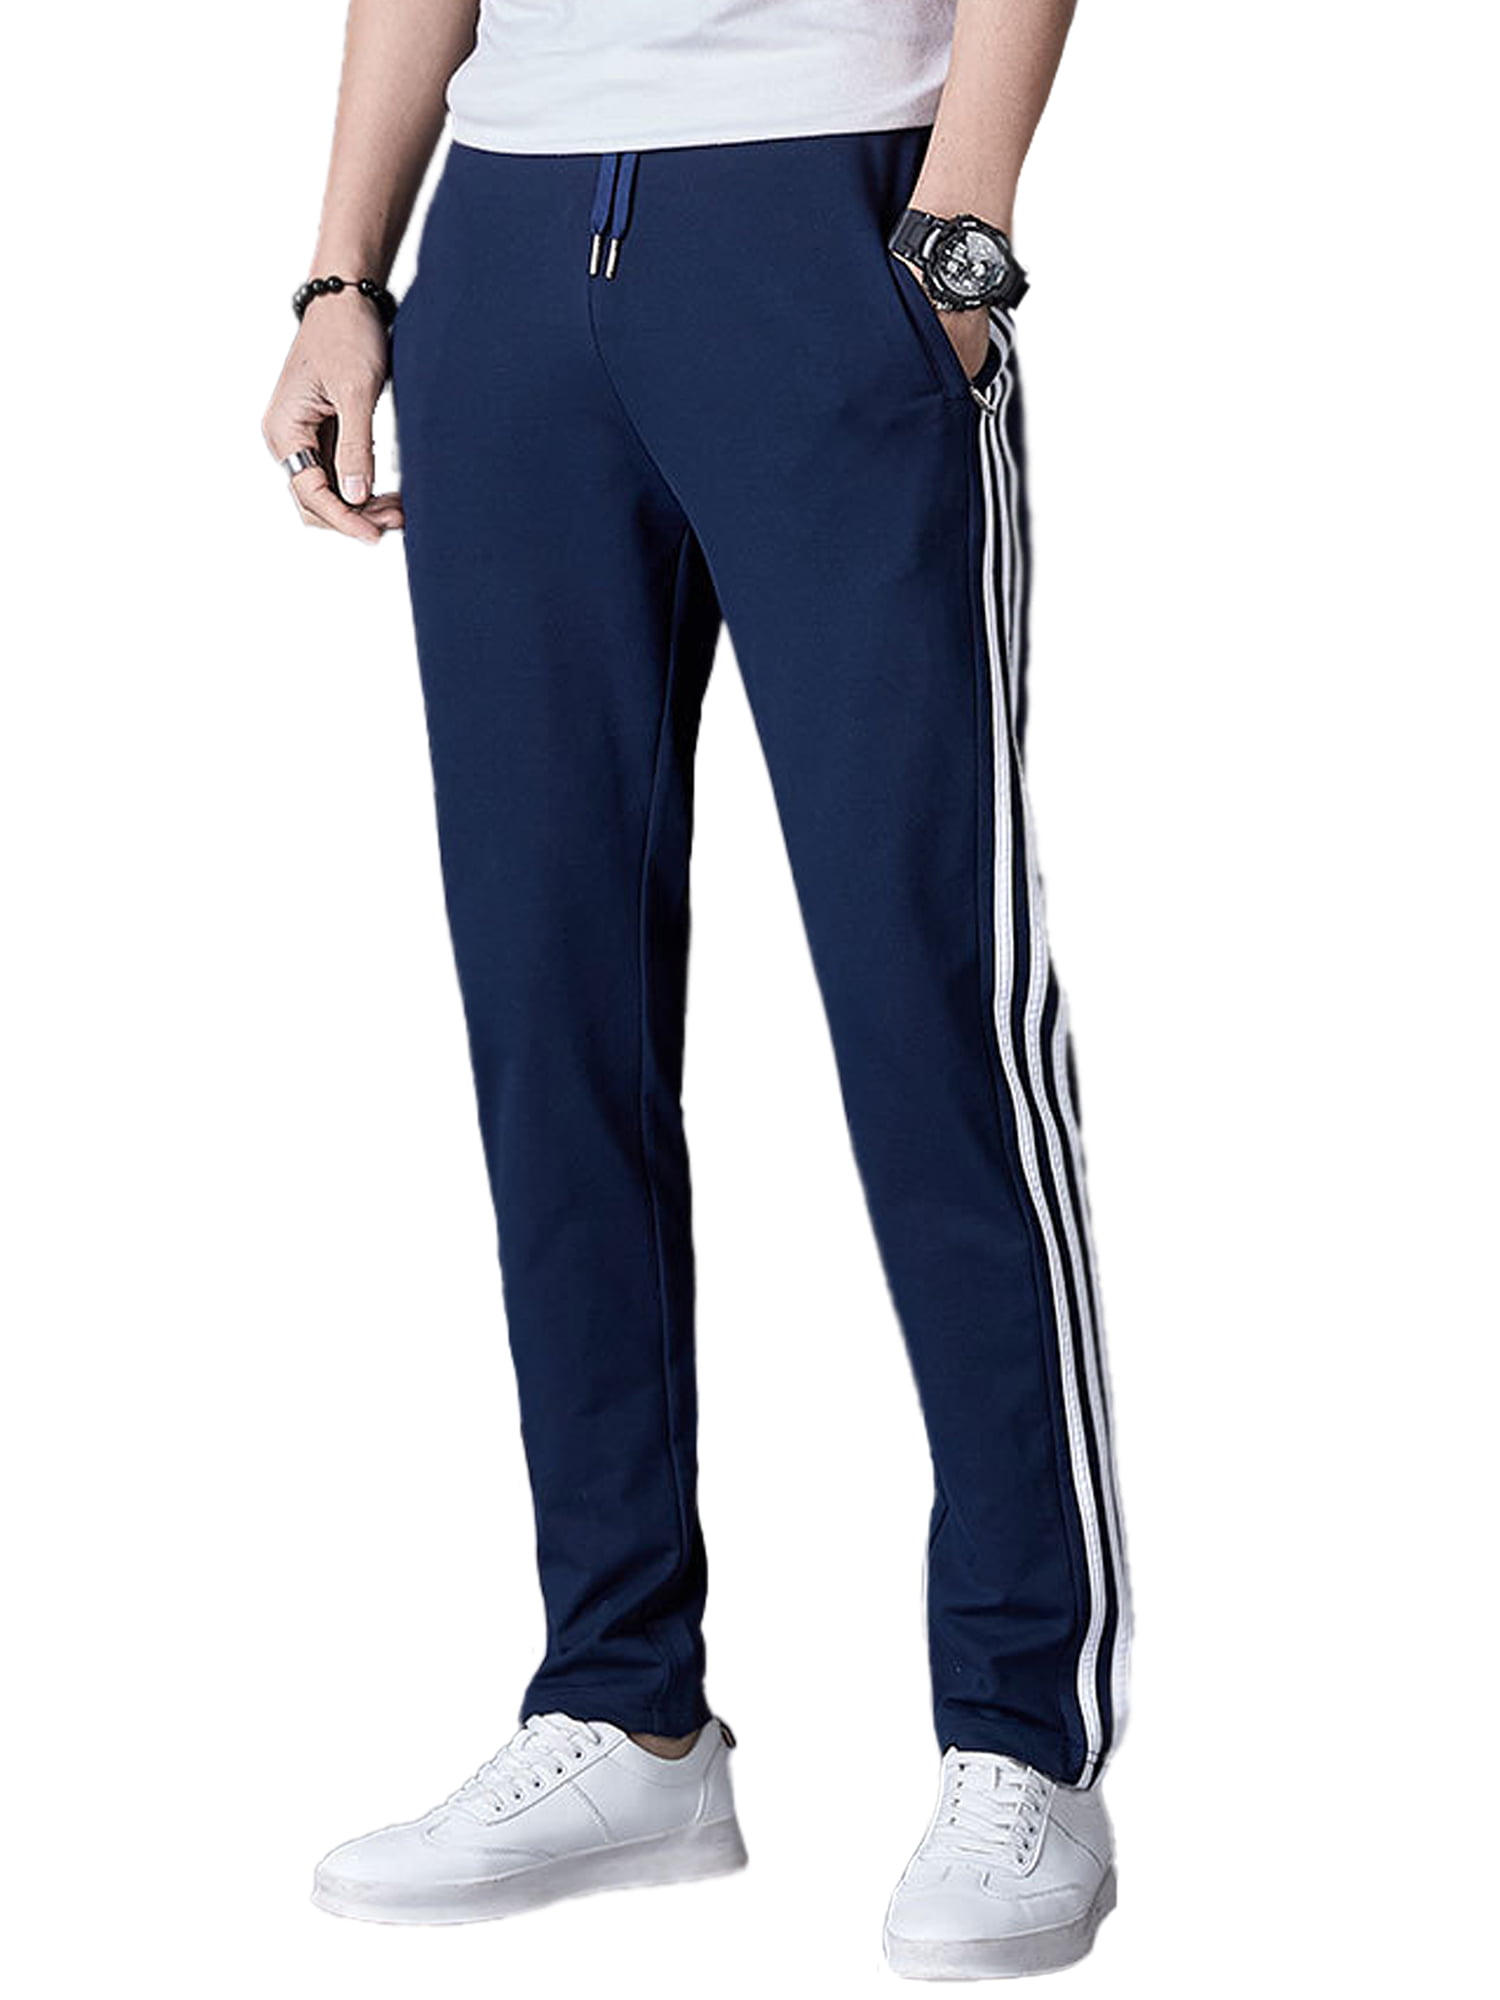 Running Workout Mens Sweatpants with Zipper Pockets Plus Size for Jogging